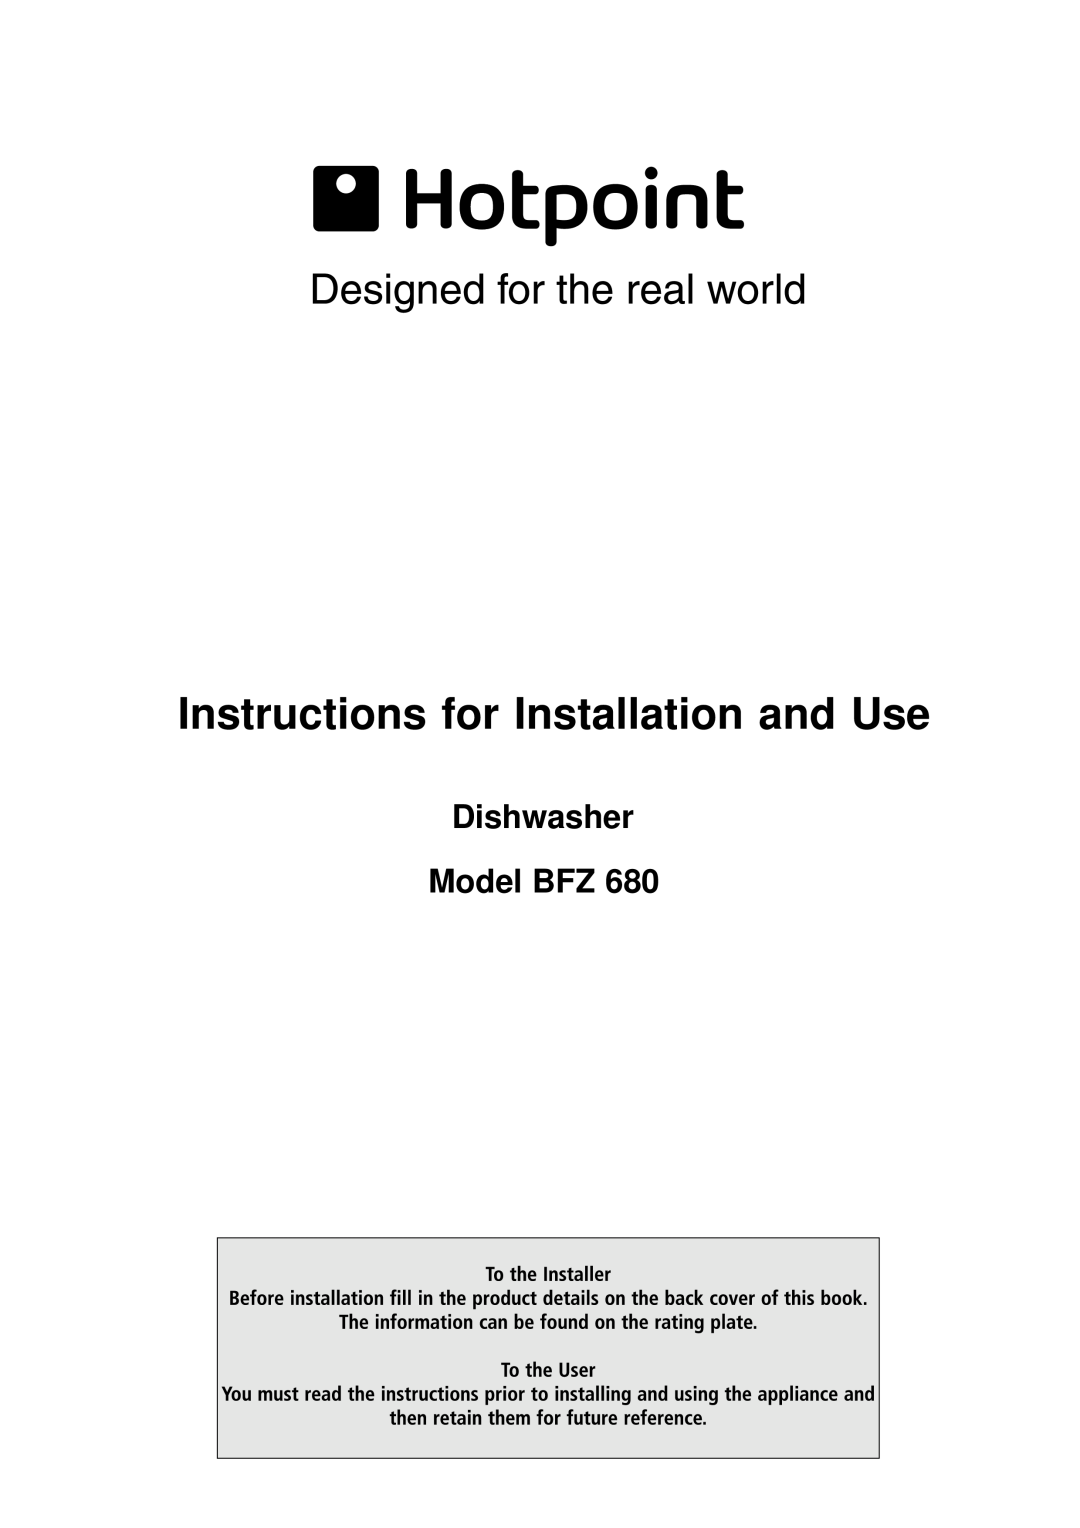 Hotpoint BFZ 680 manual Instructions for Installation and Use, Dishwasher Model BFZ 